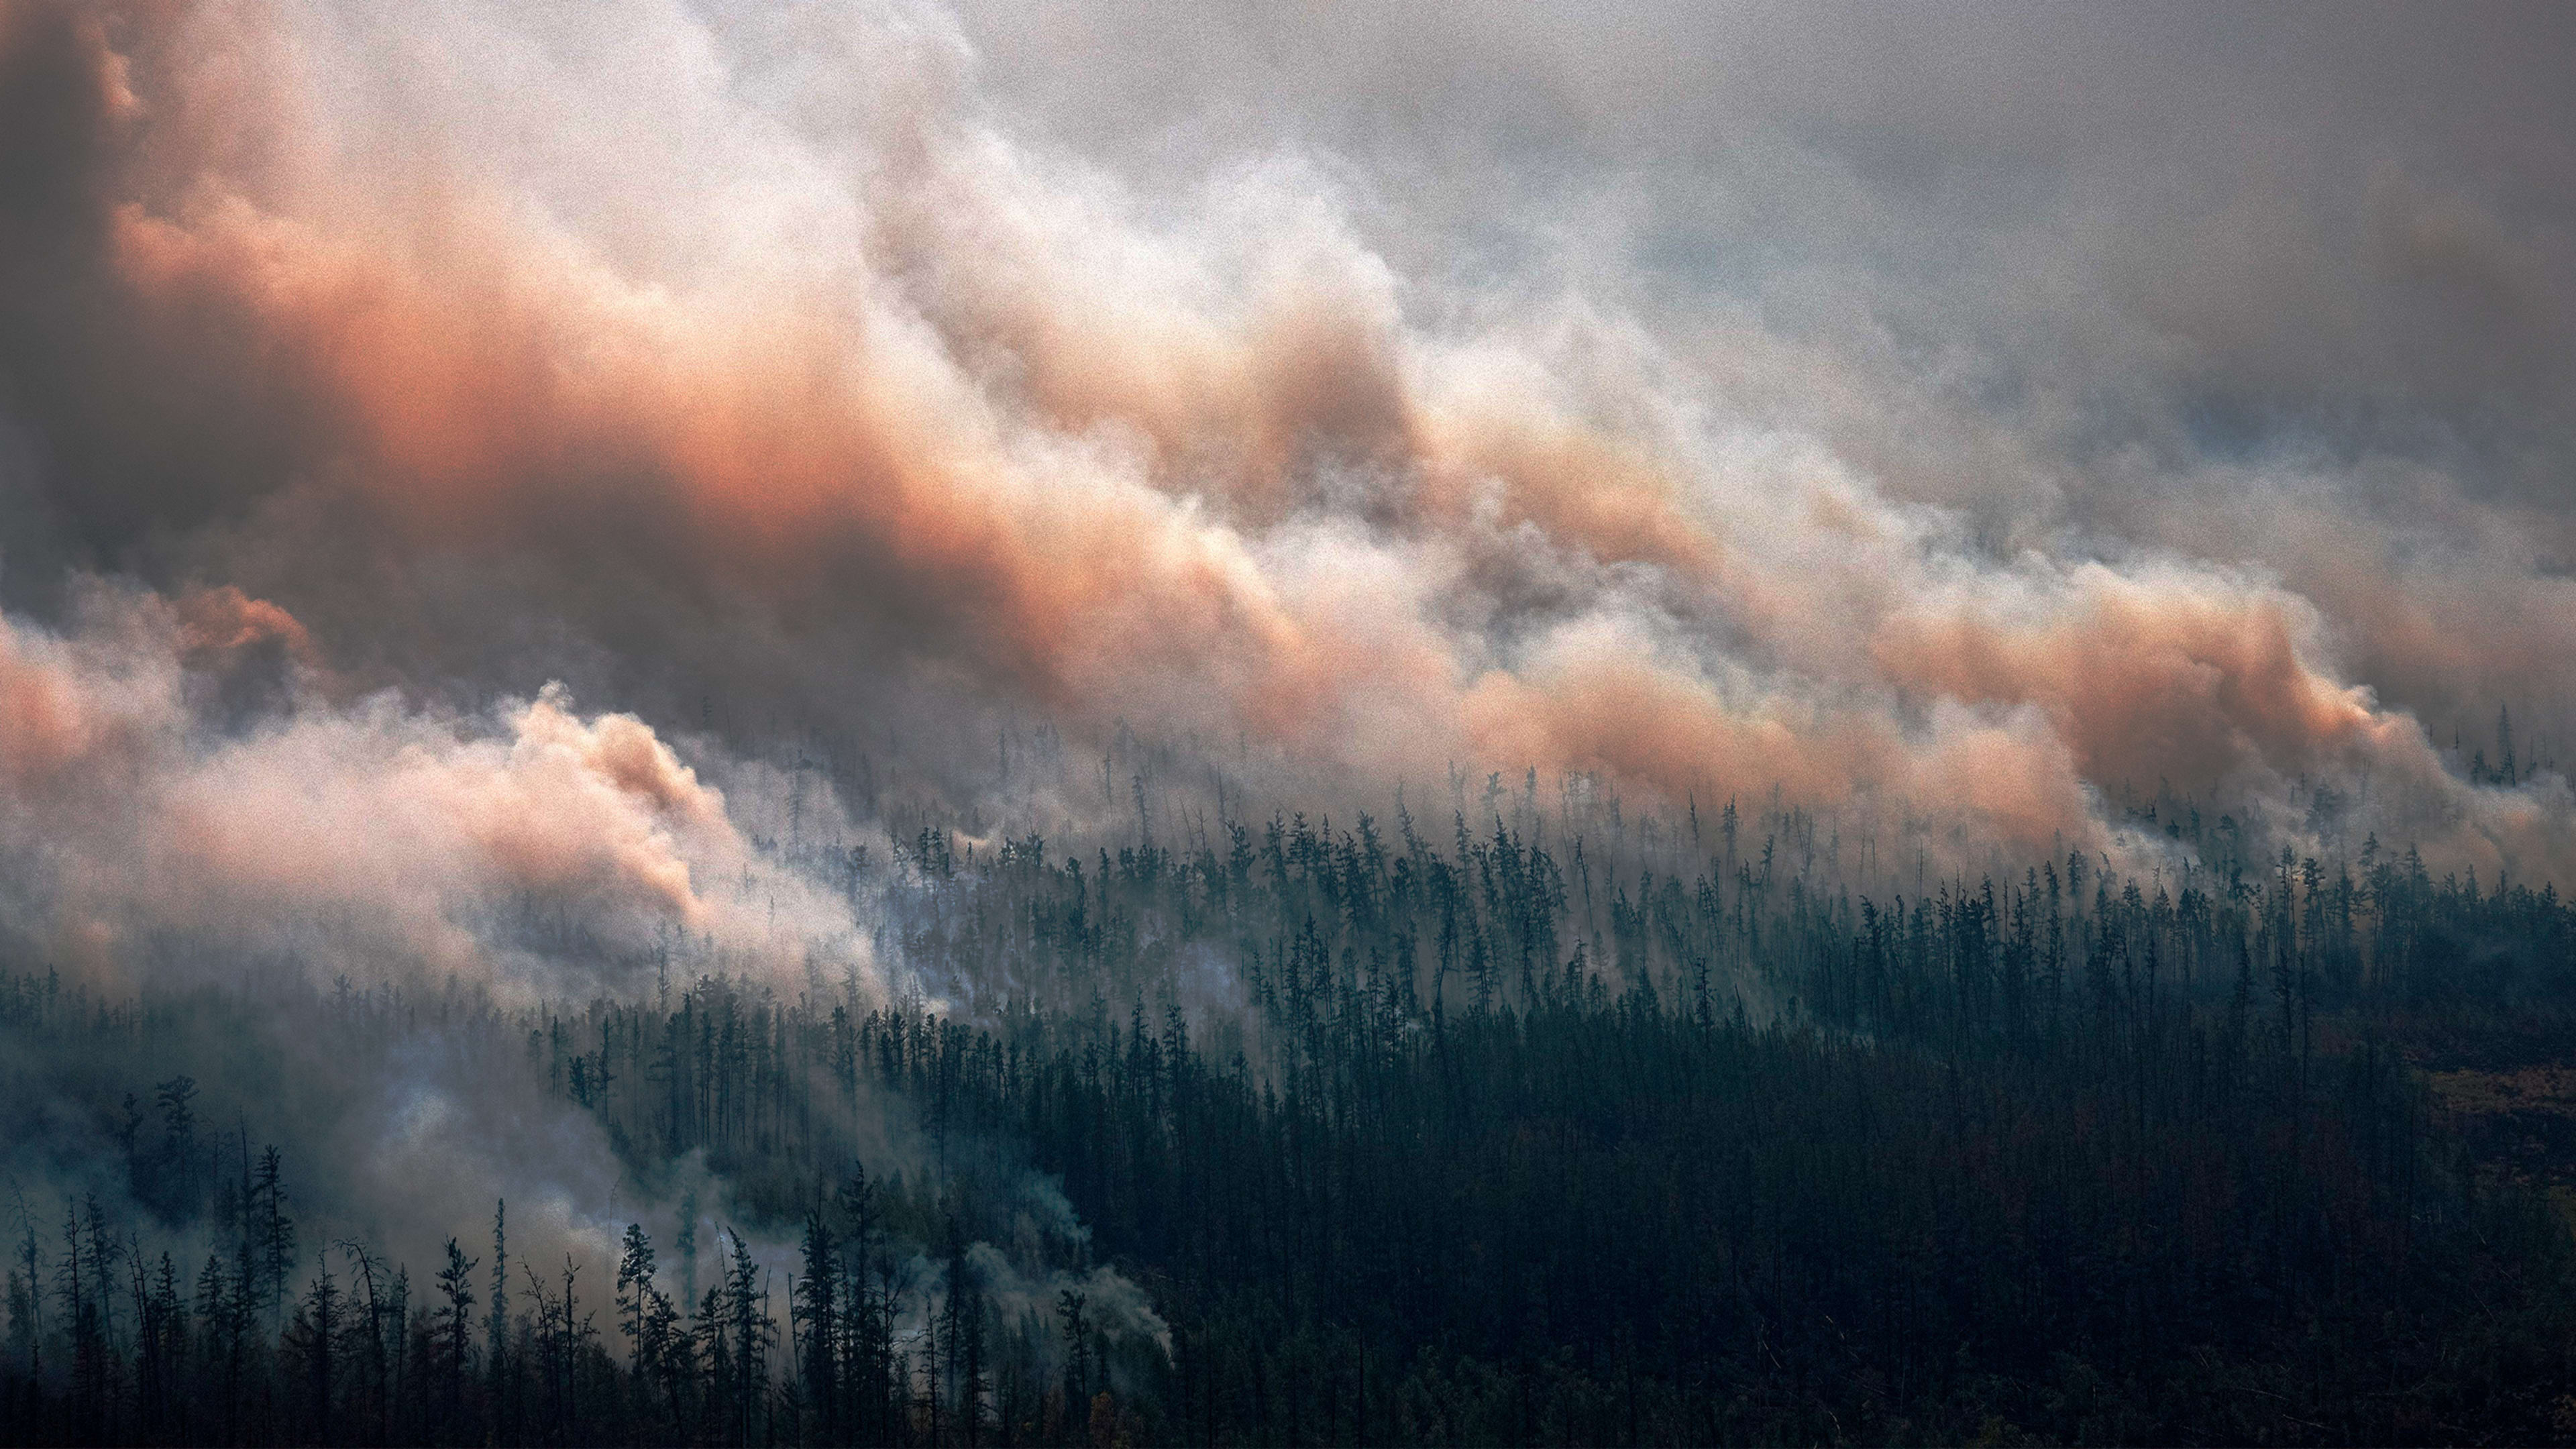 Forest fires are burning twice the amount of tree cover they did just 20 years ago